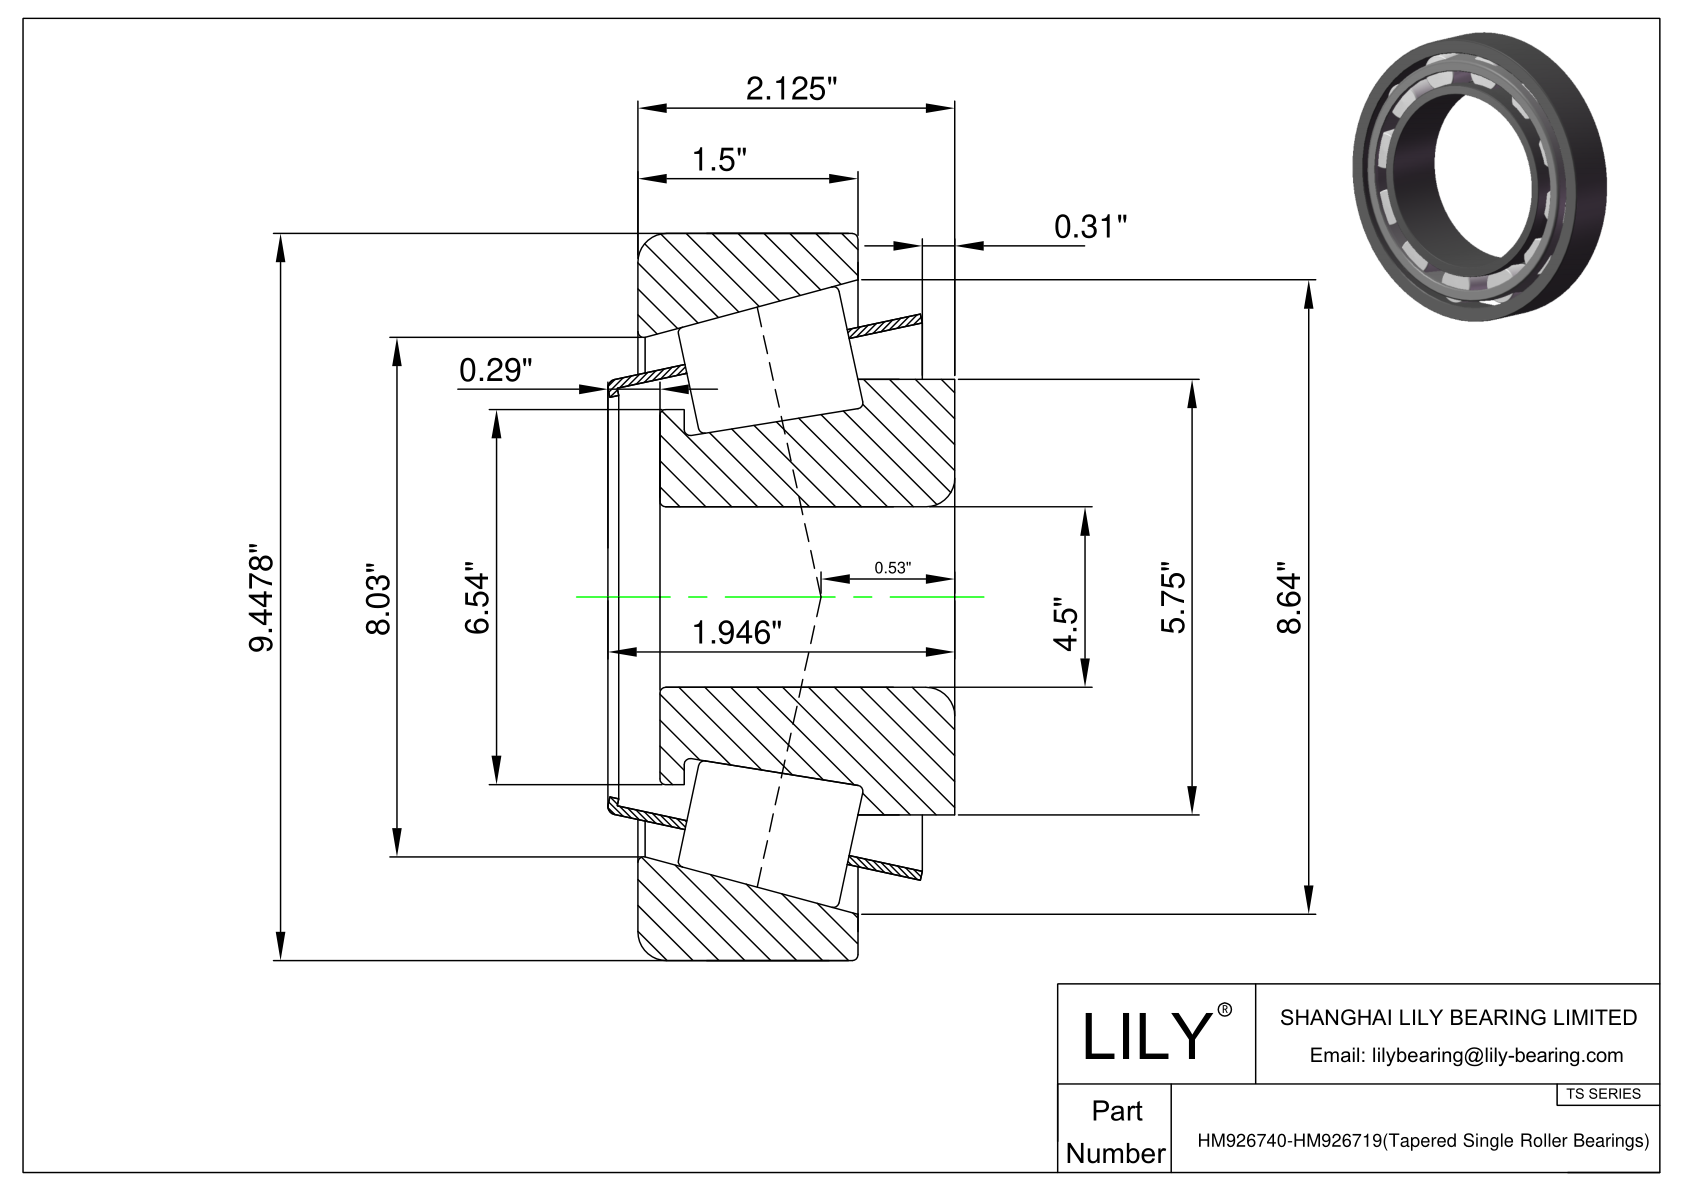 HM926740-HM926719 TS (Tapered Single Roller Bearings) (Imperial) cad drawing